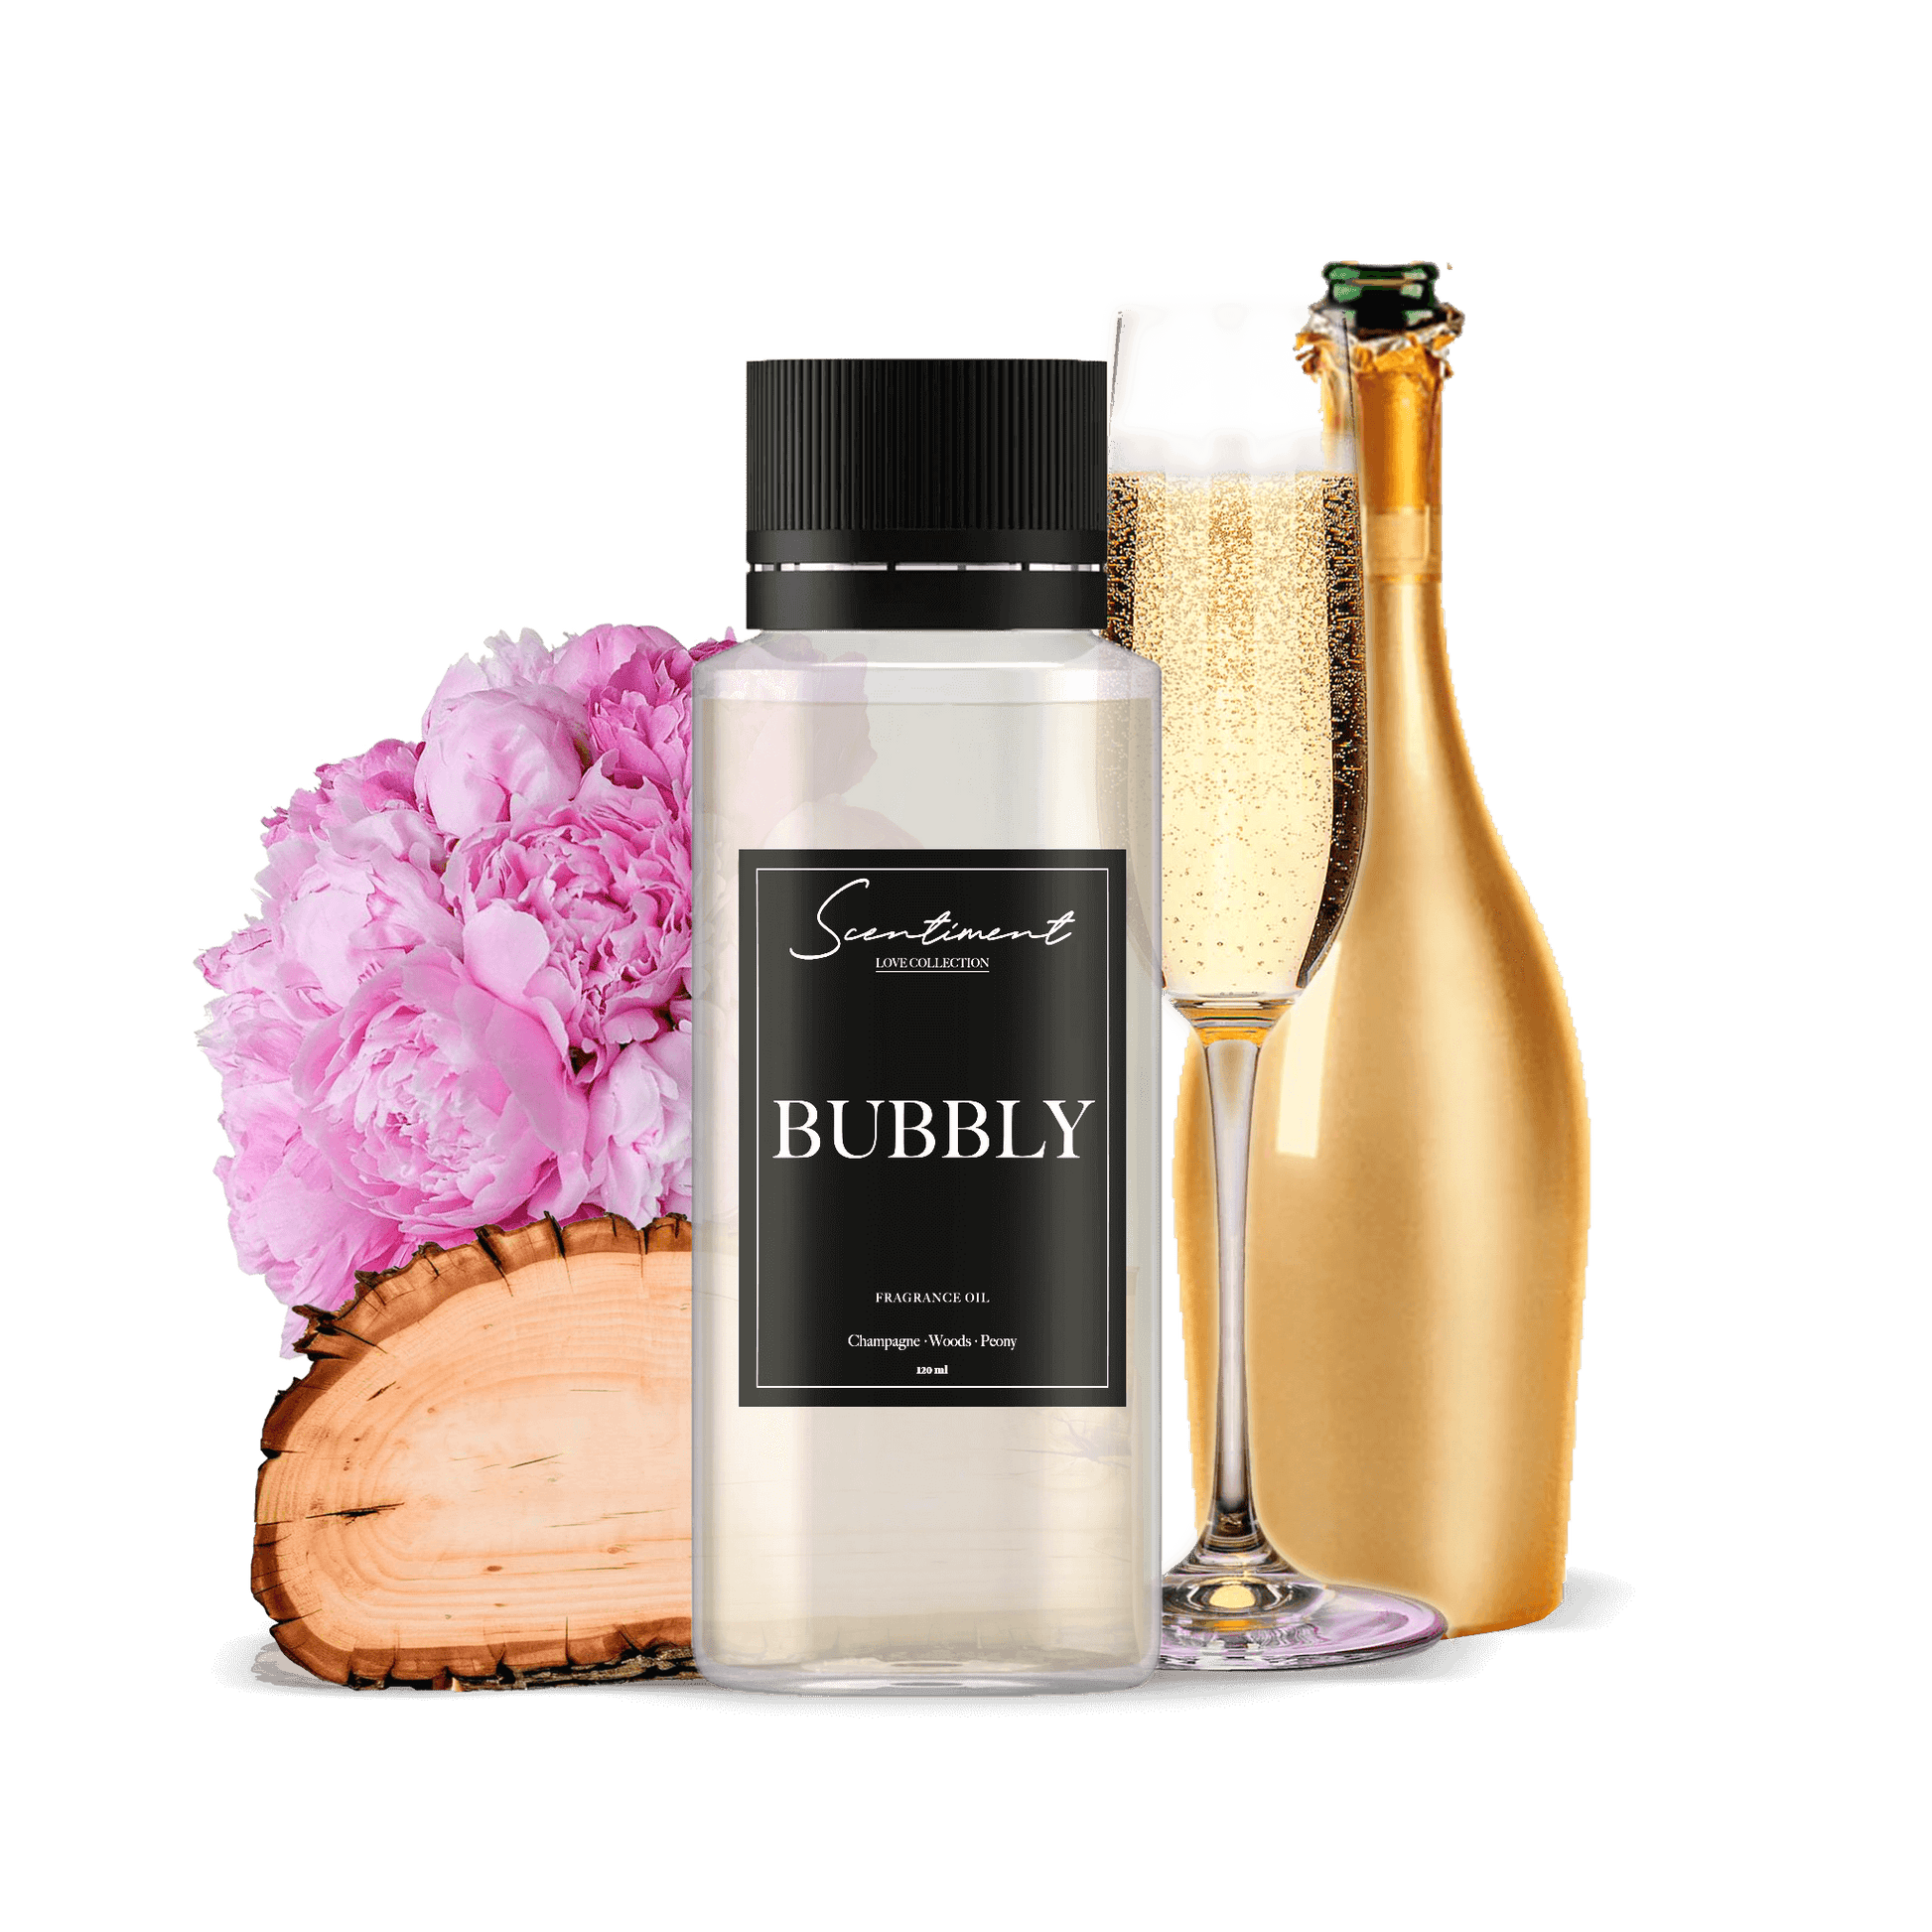 Bubbly Oil Fragrance, with notes of Champagne, Woods, and Peony.